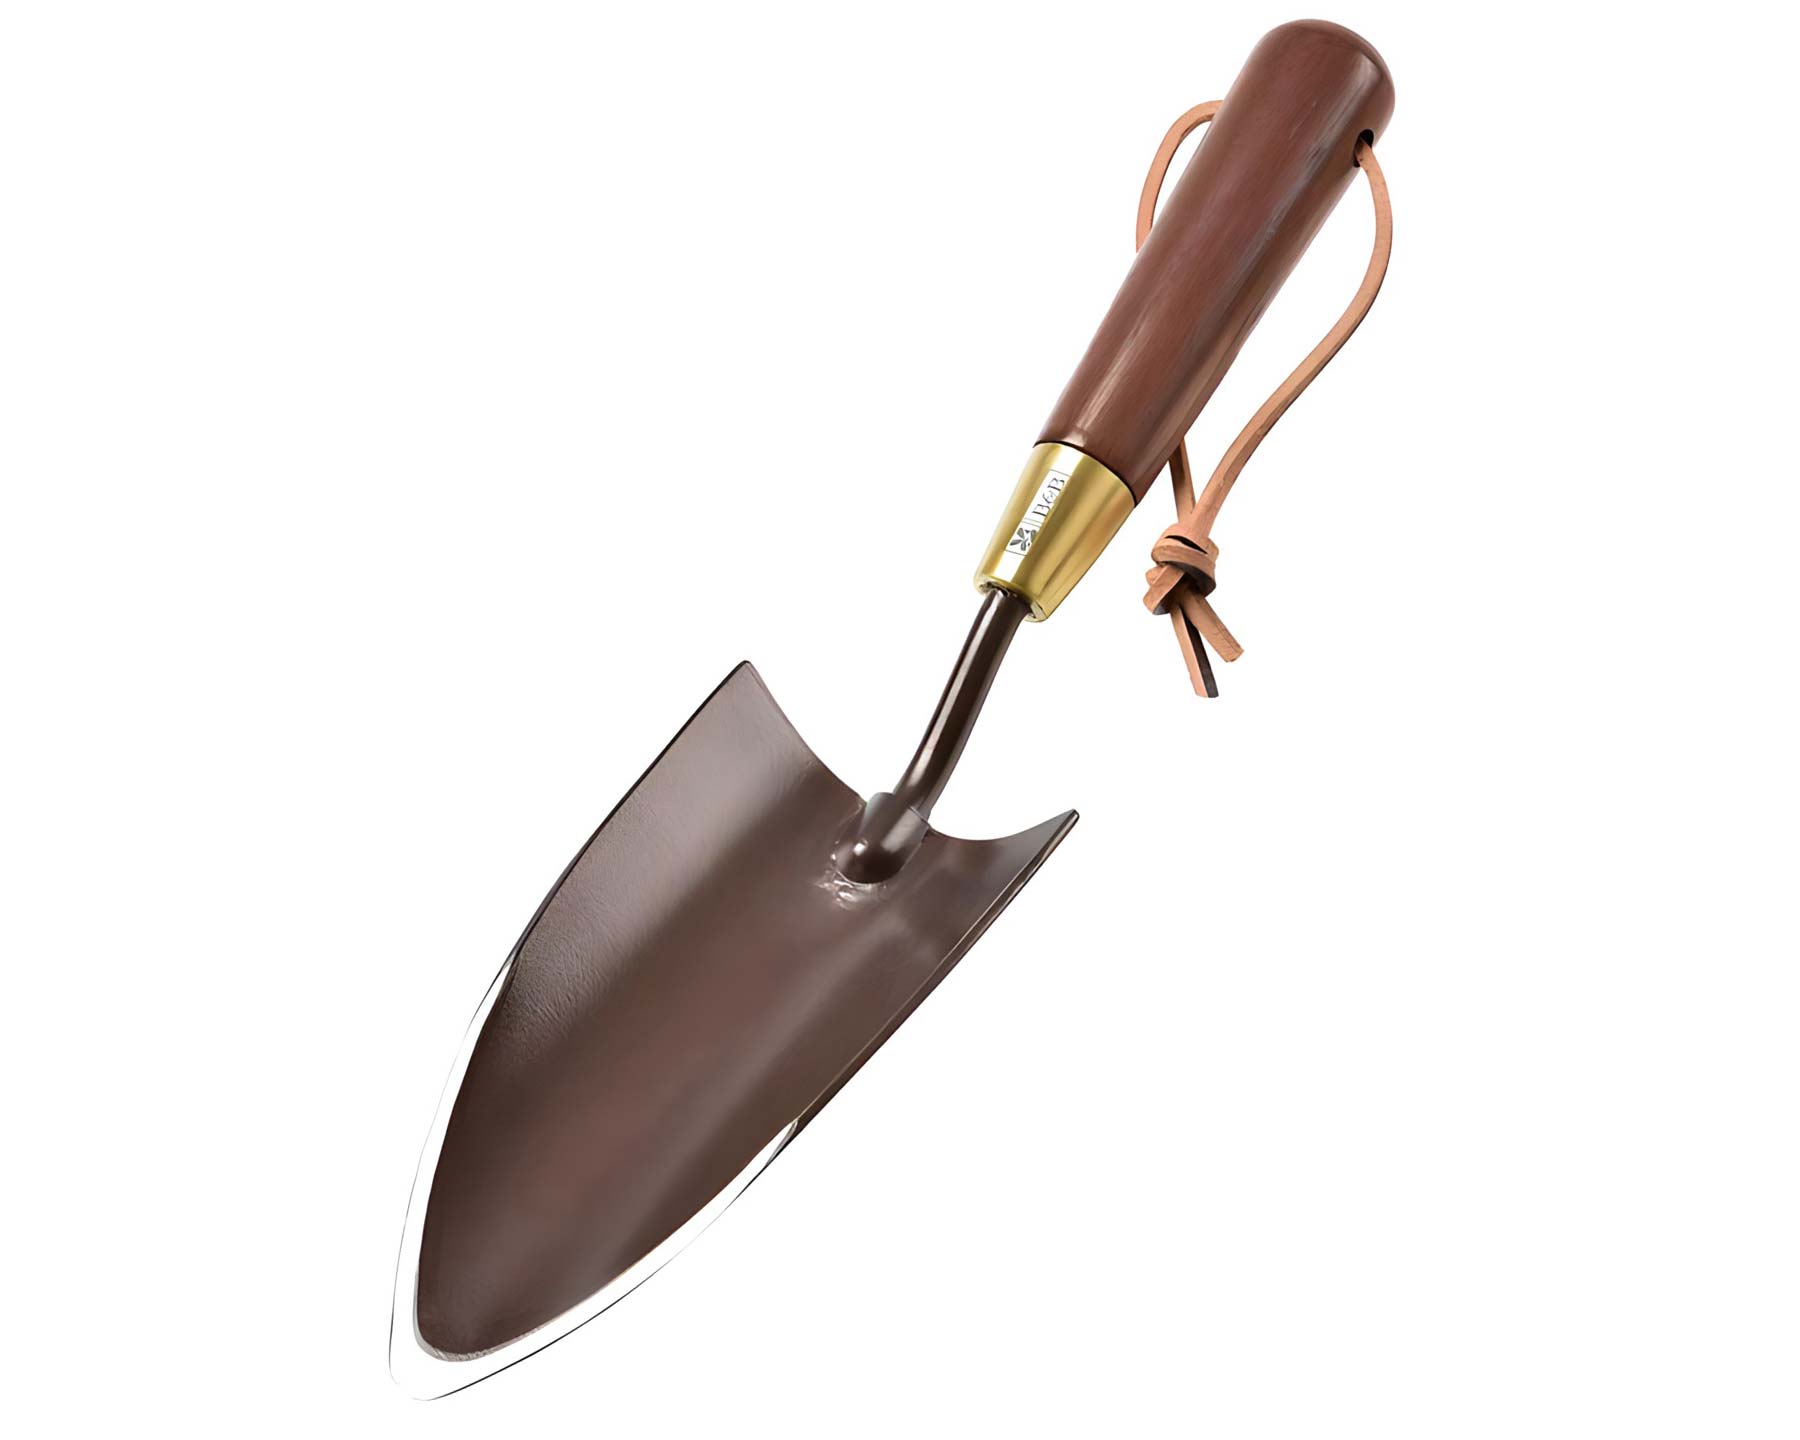 Hand Trowel part of the new National Trust range of garden tools by Burgon and Ball